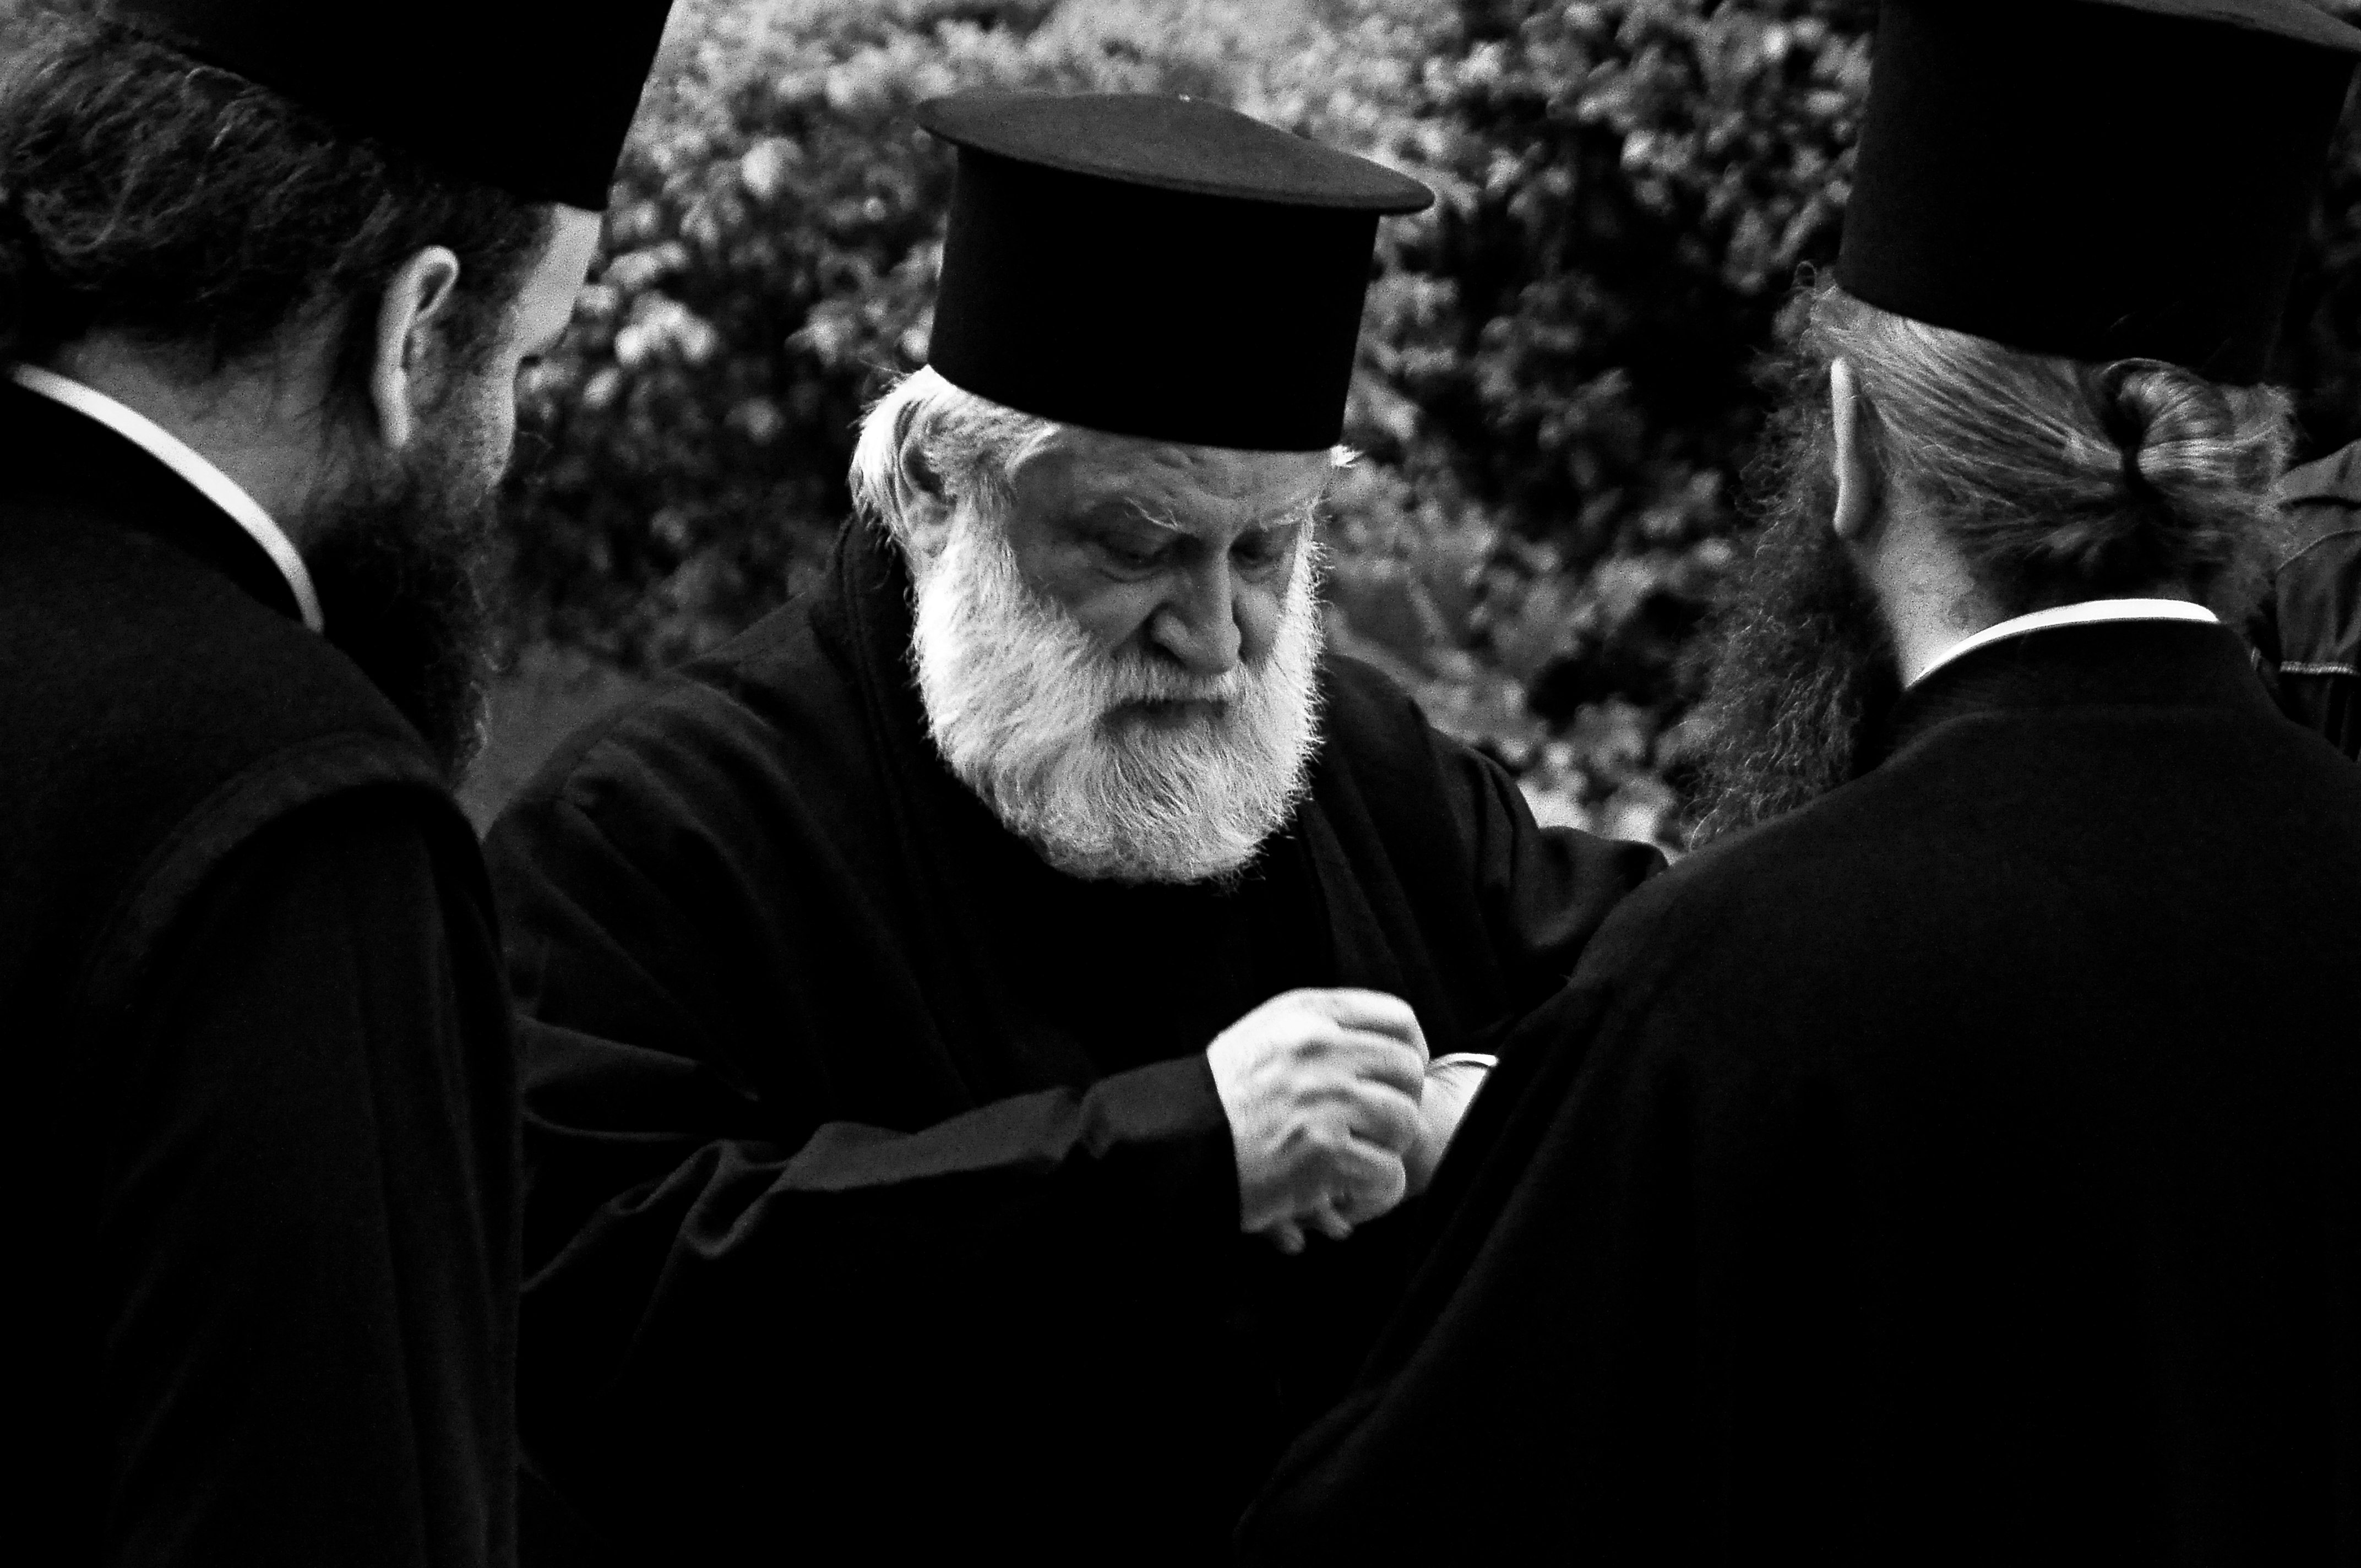 grayscale photography of three men wearing black robes and hats